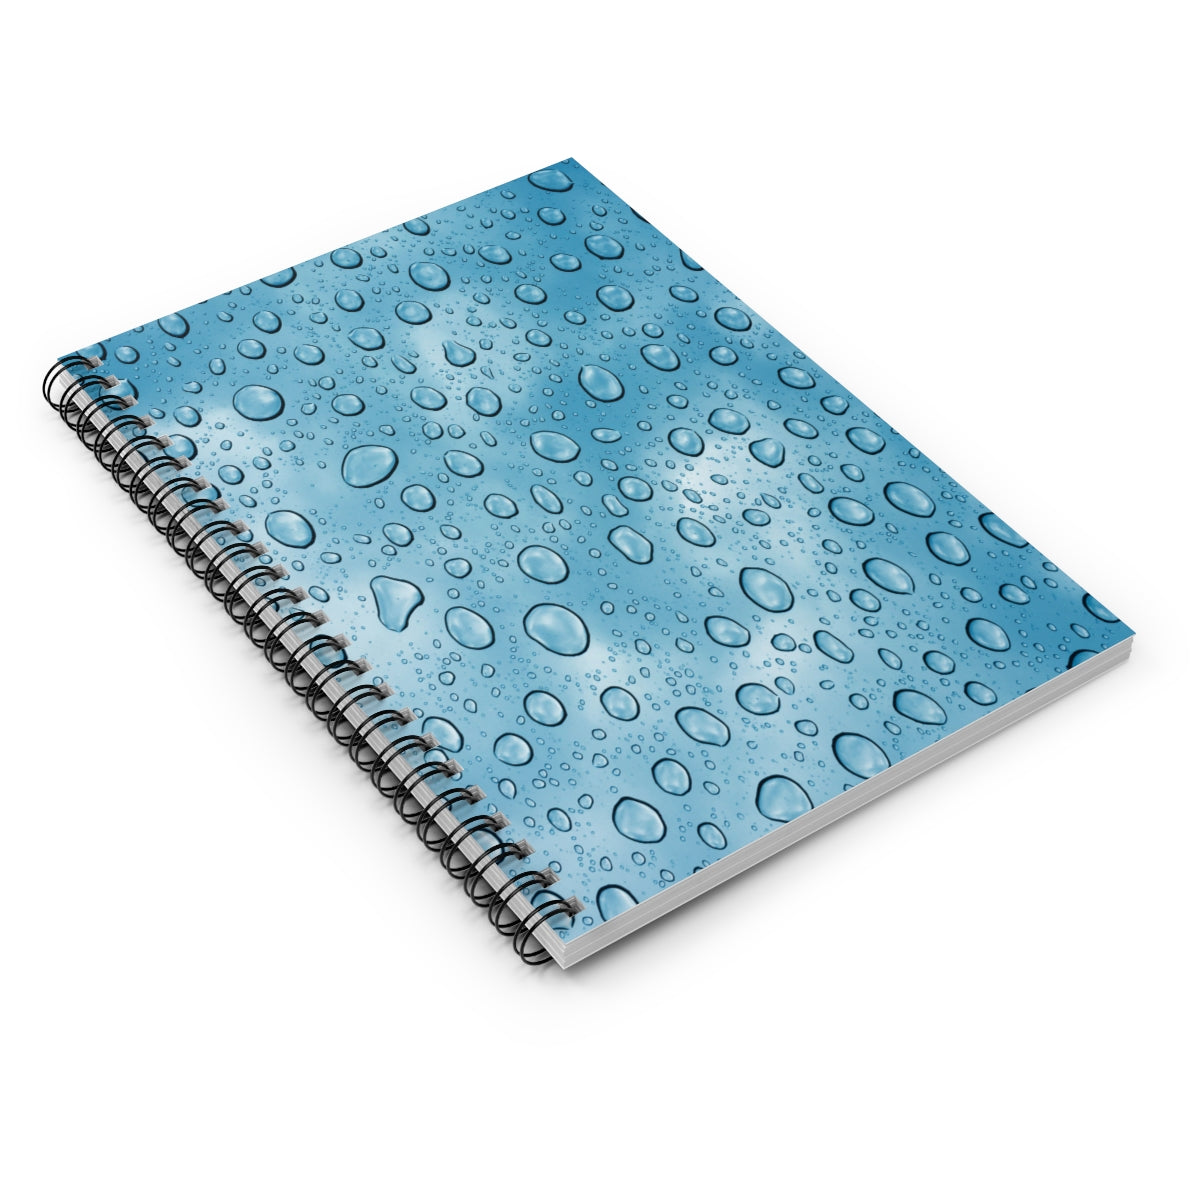 Blue Water Droplets Spiral Ruled Line Notebook